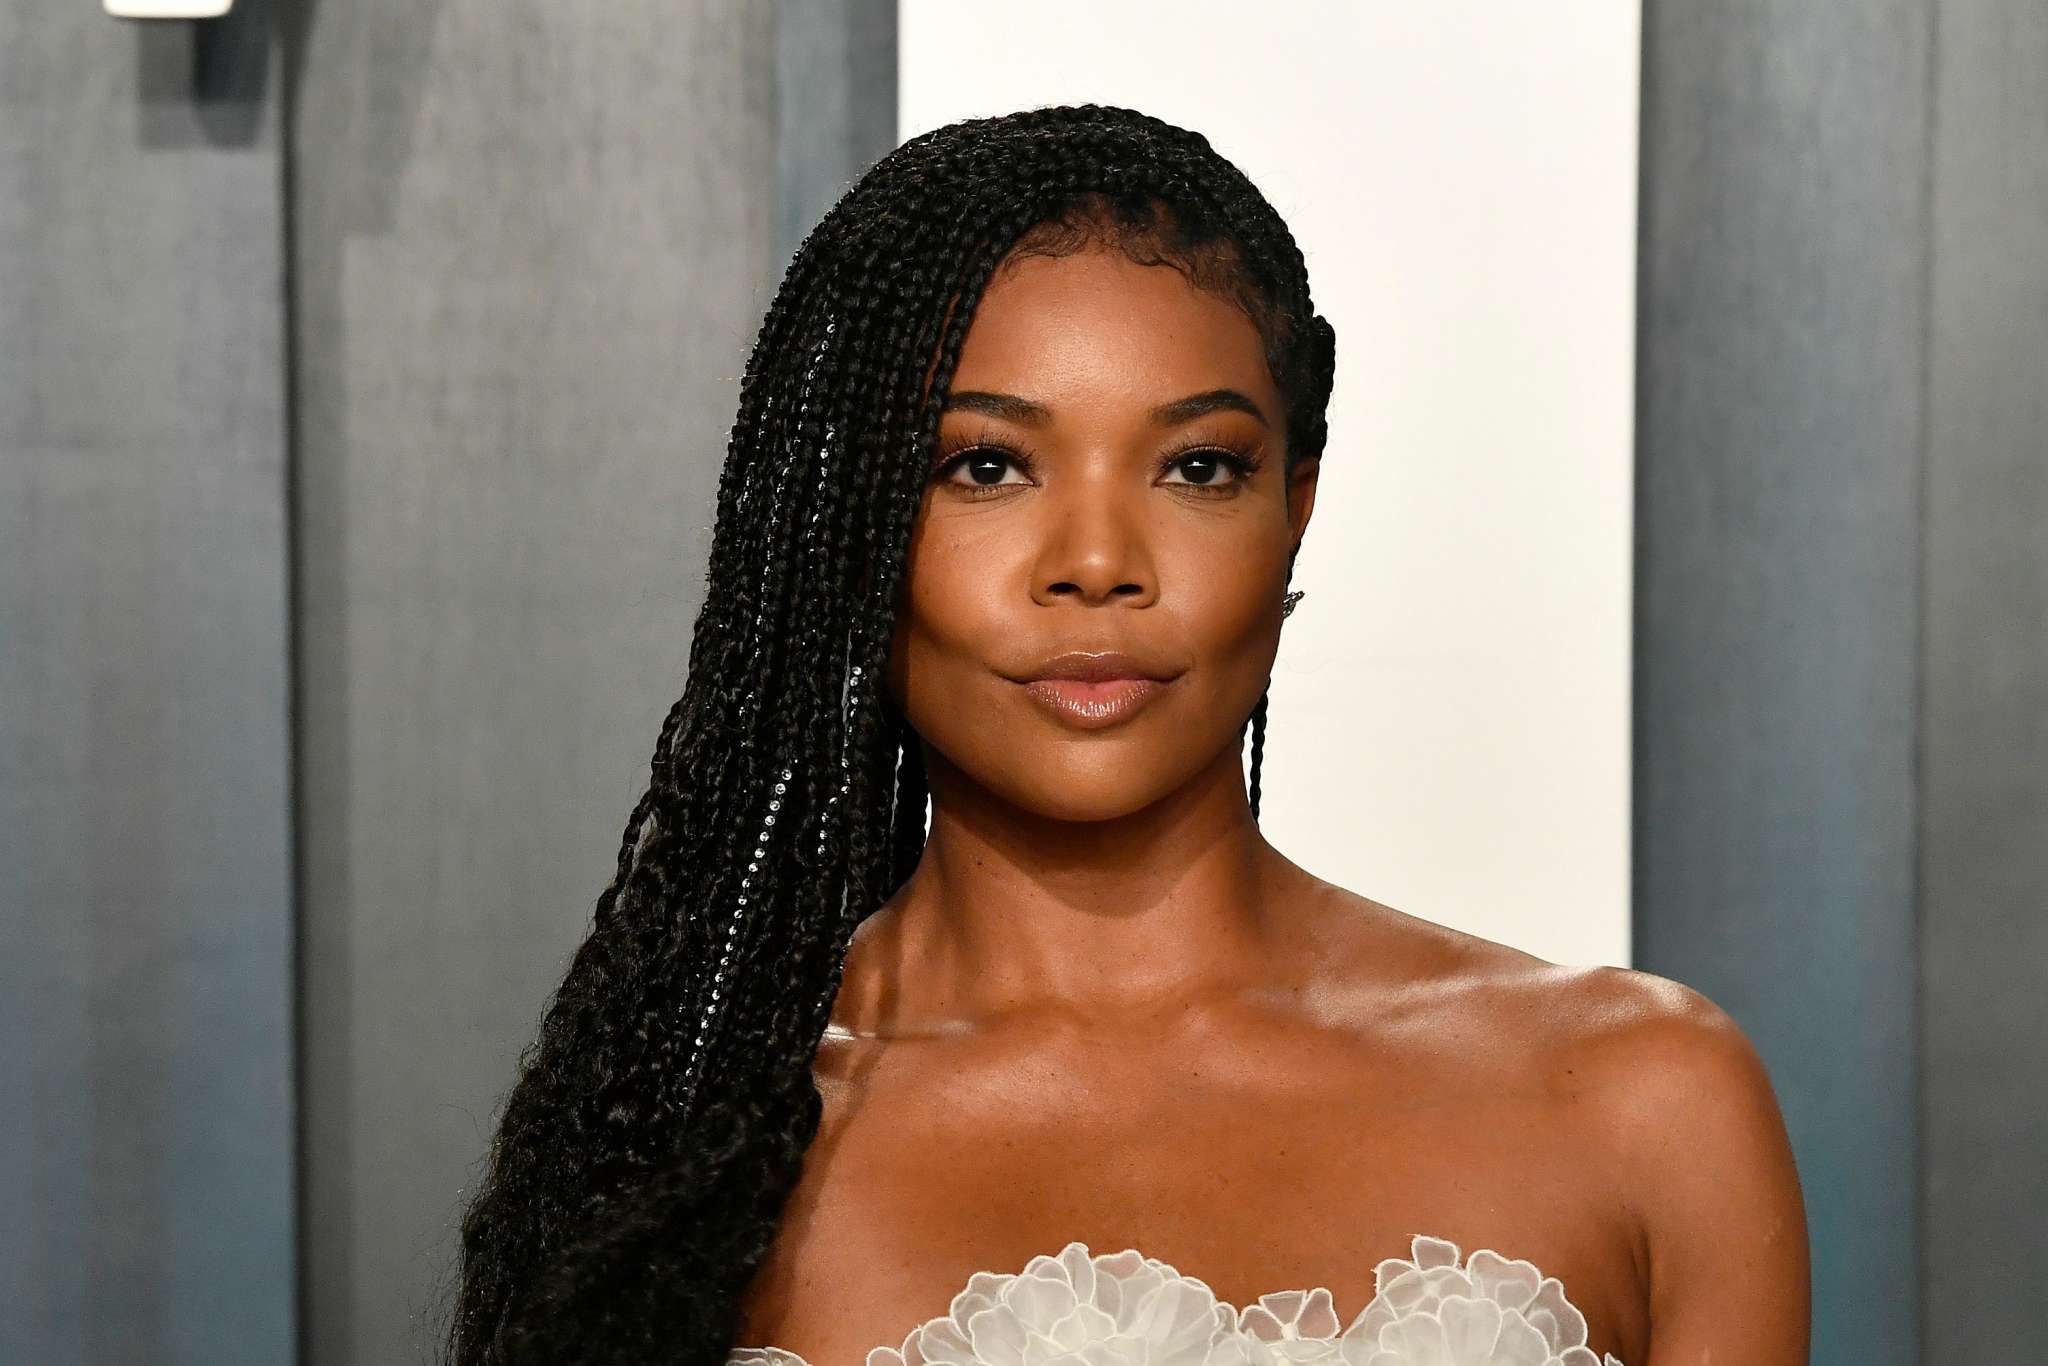 ”gabrielle-union-shows-off-her-curves-and-2022-energy-in-these-family-pics”